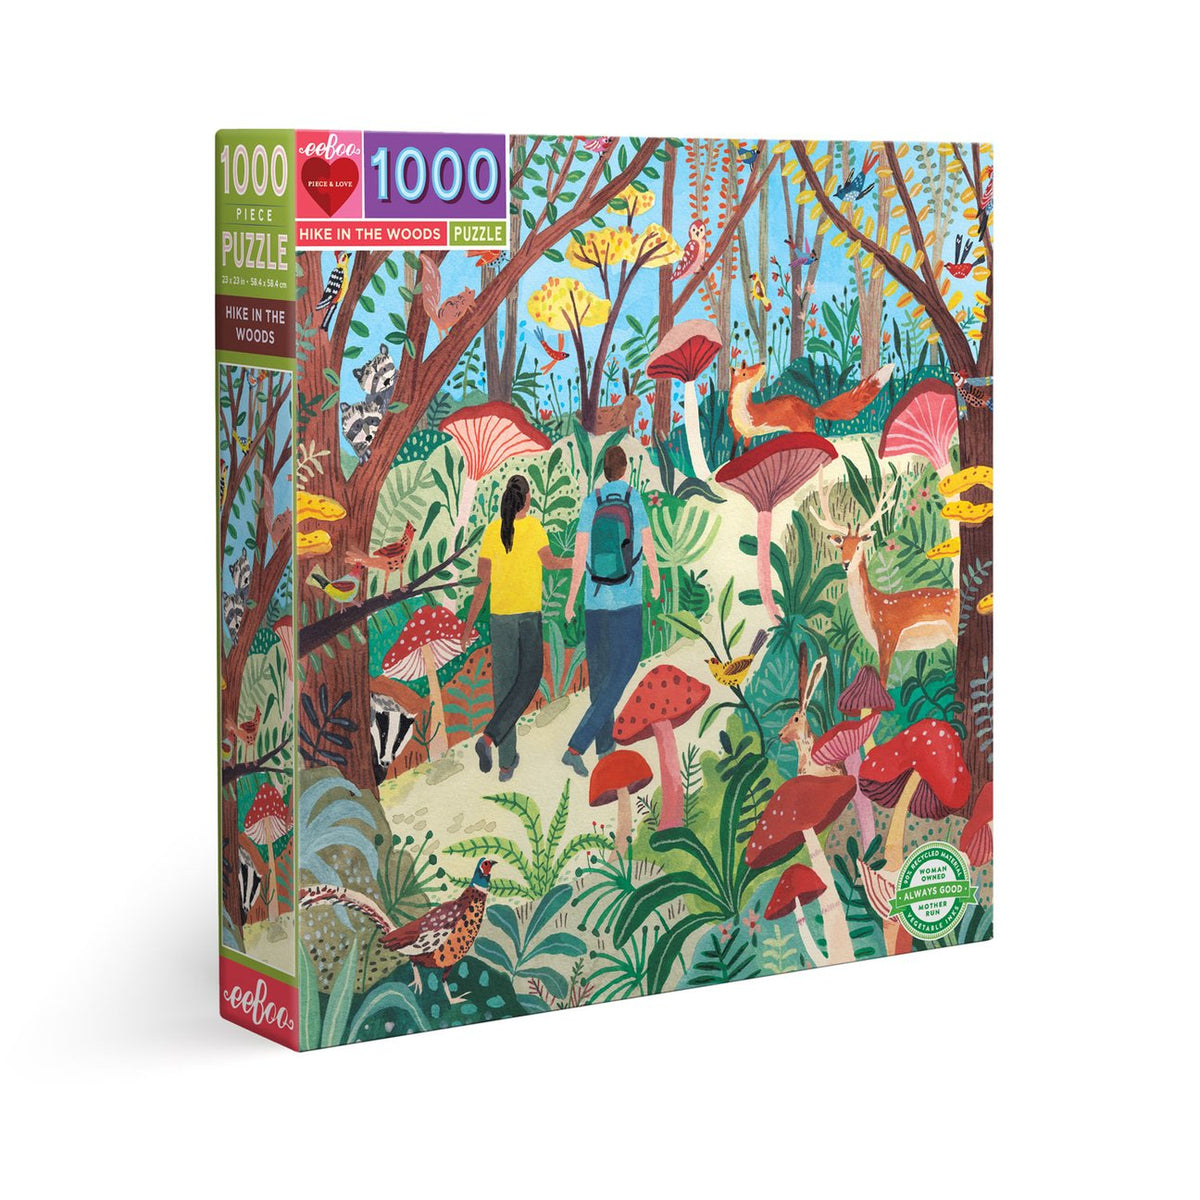 Hike in the Woods 1000 Piece Puzzle - Quick Ship - Puzzlicious.com